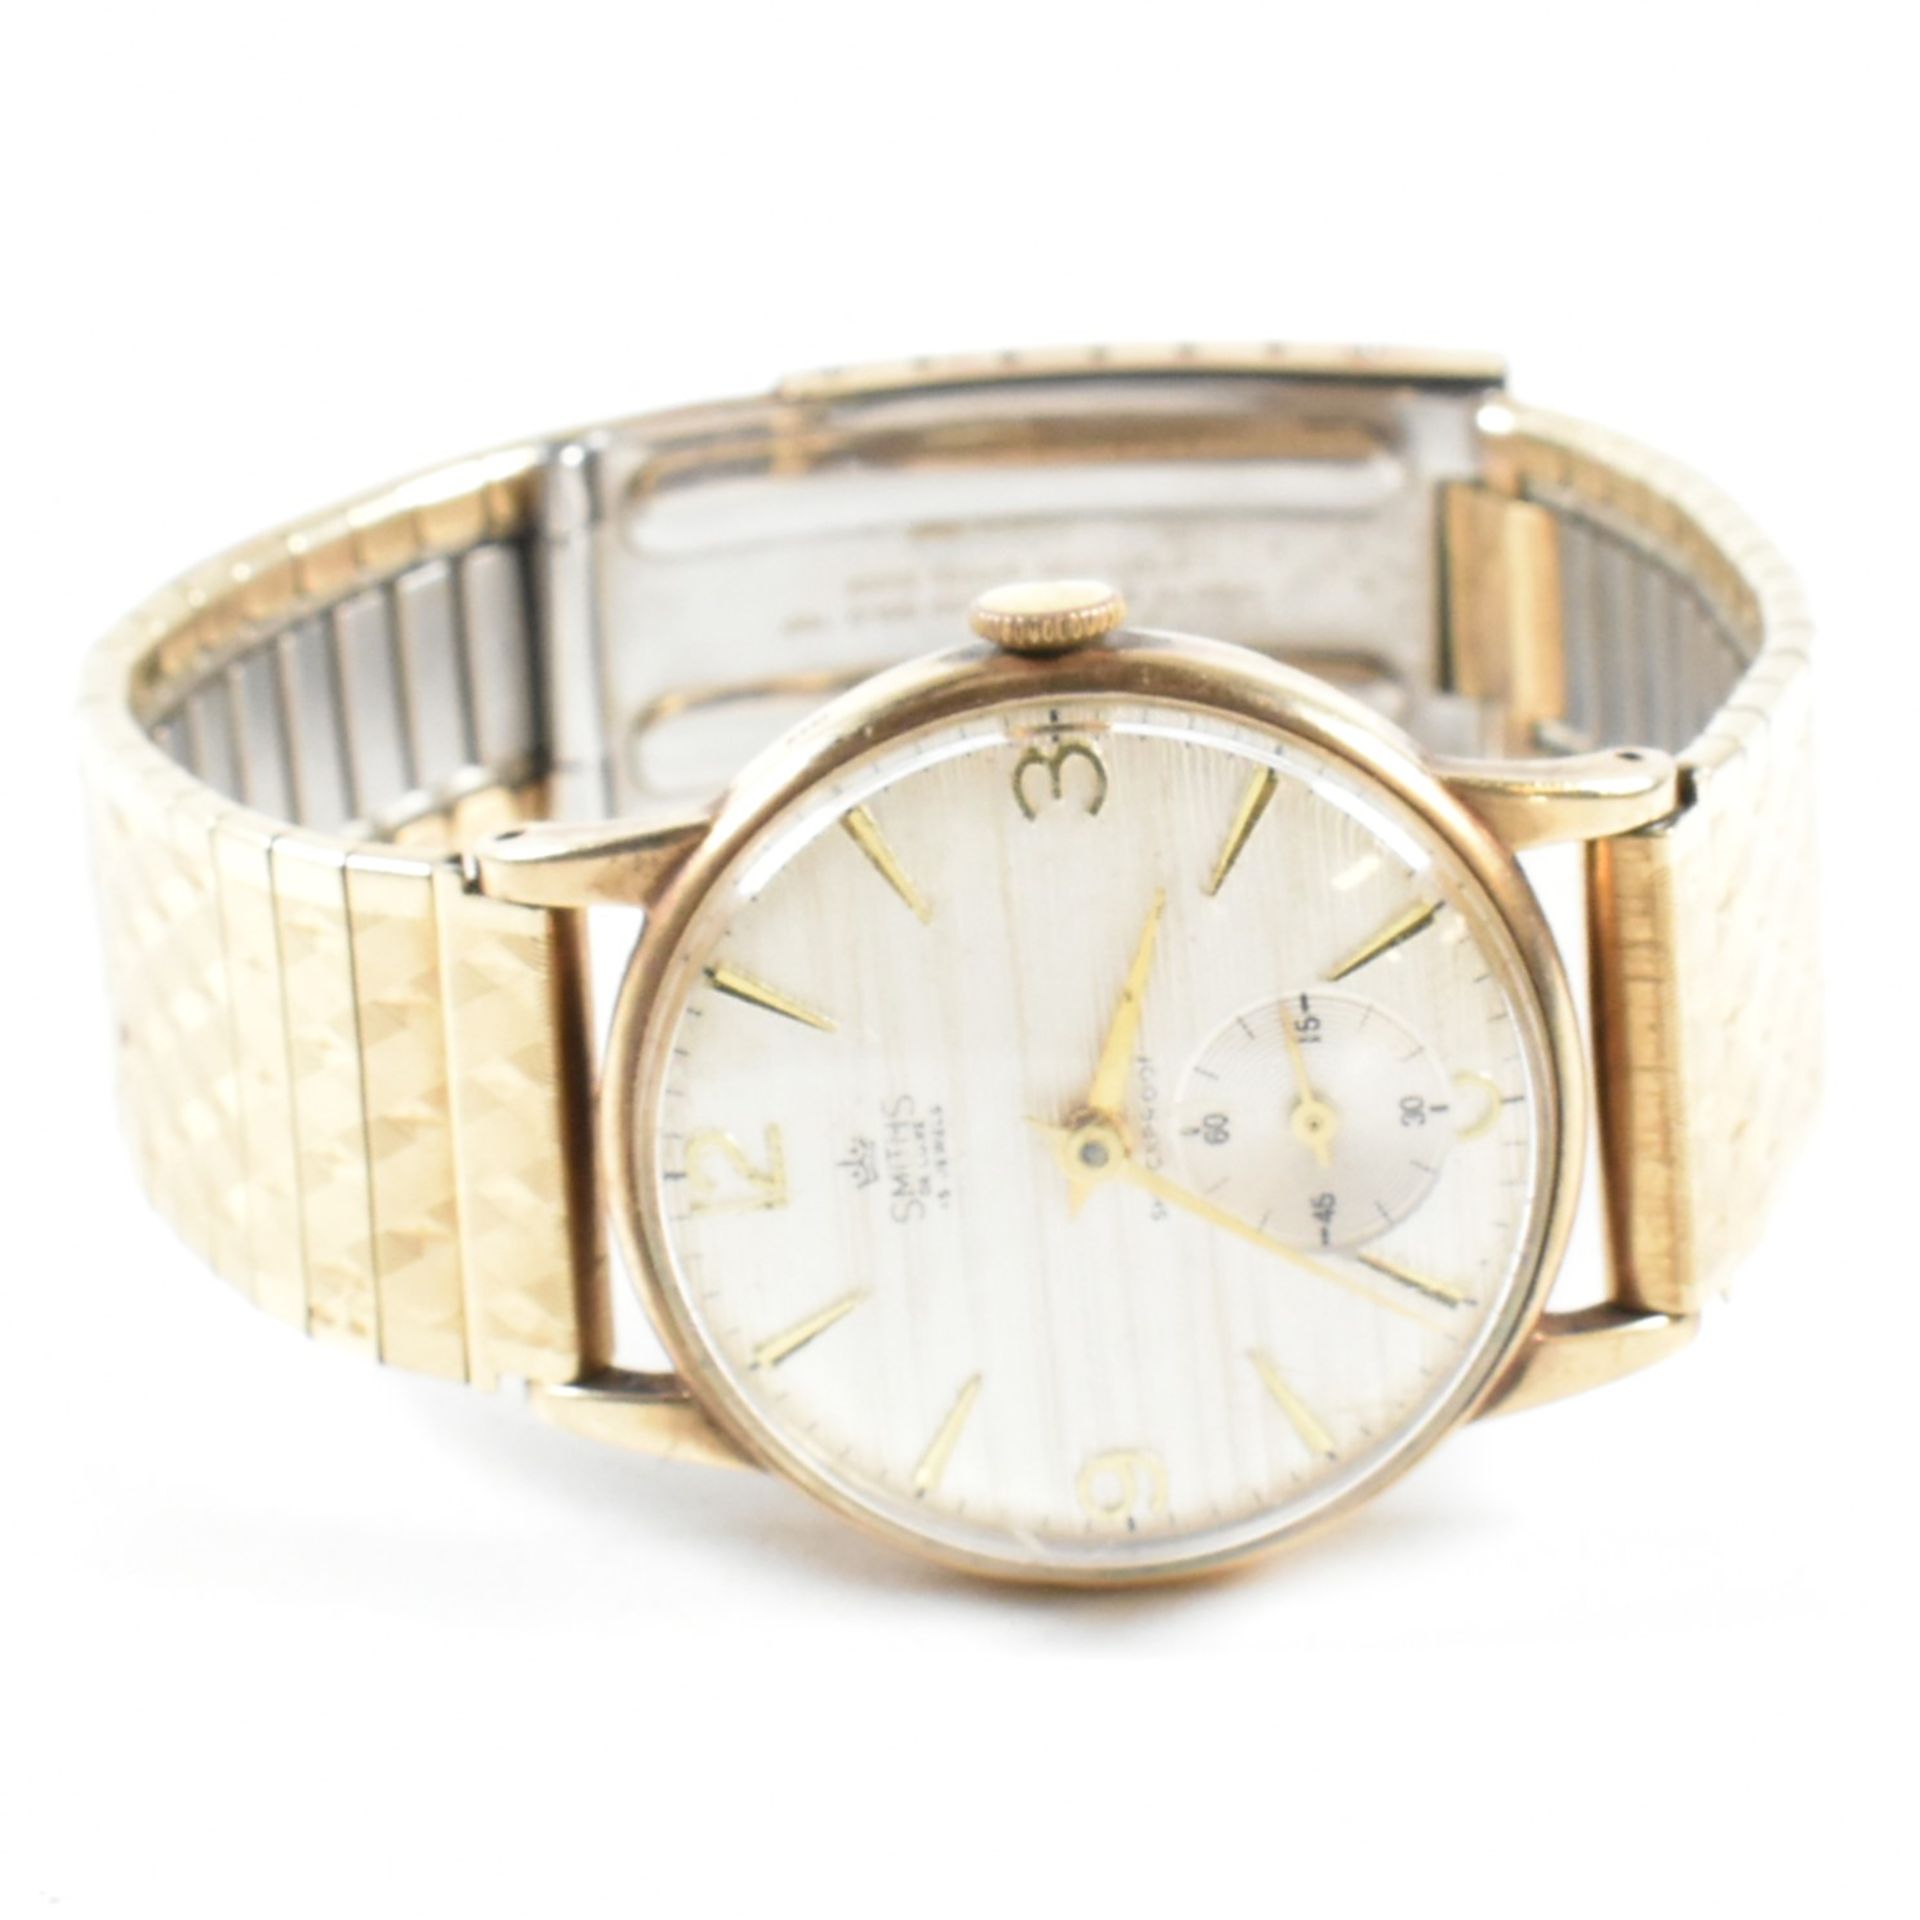 9CT GOLD SMITHS DE LUXE WRISTWATCH ON ROLLED GOLD STRAP - Image 4 of 5